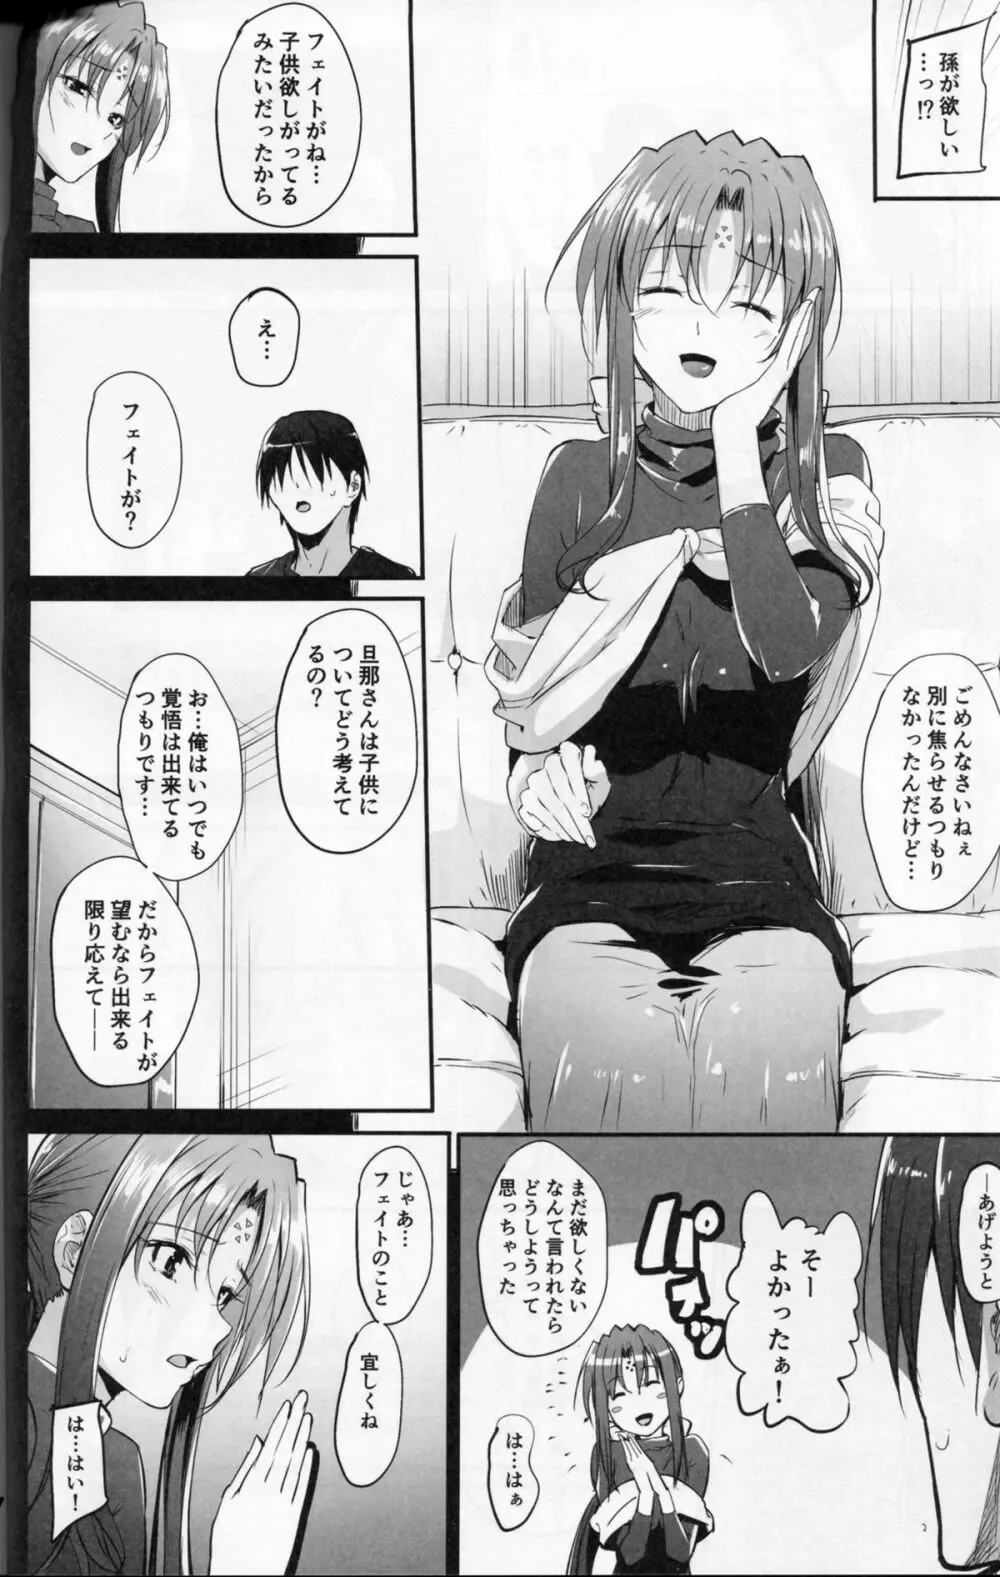 Home Sweet Home ～フェイト編 6～ - page5